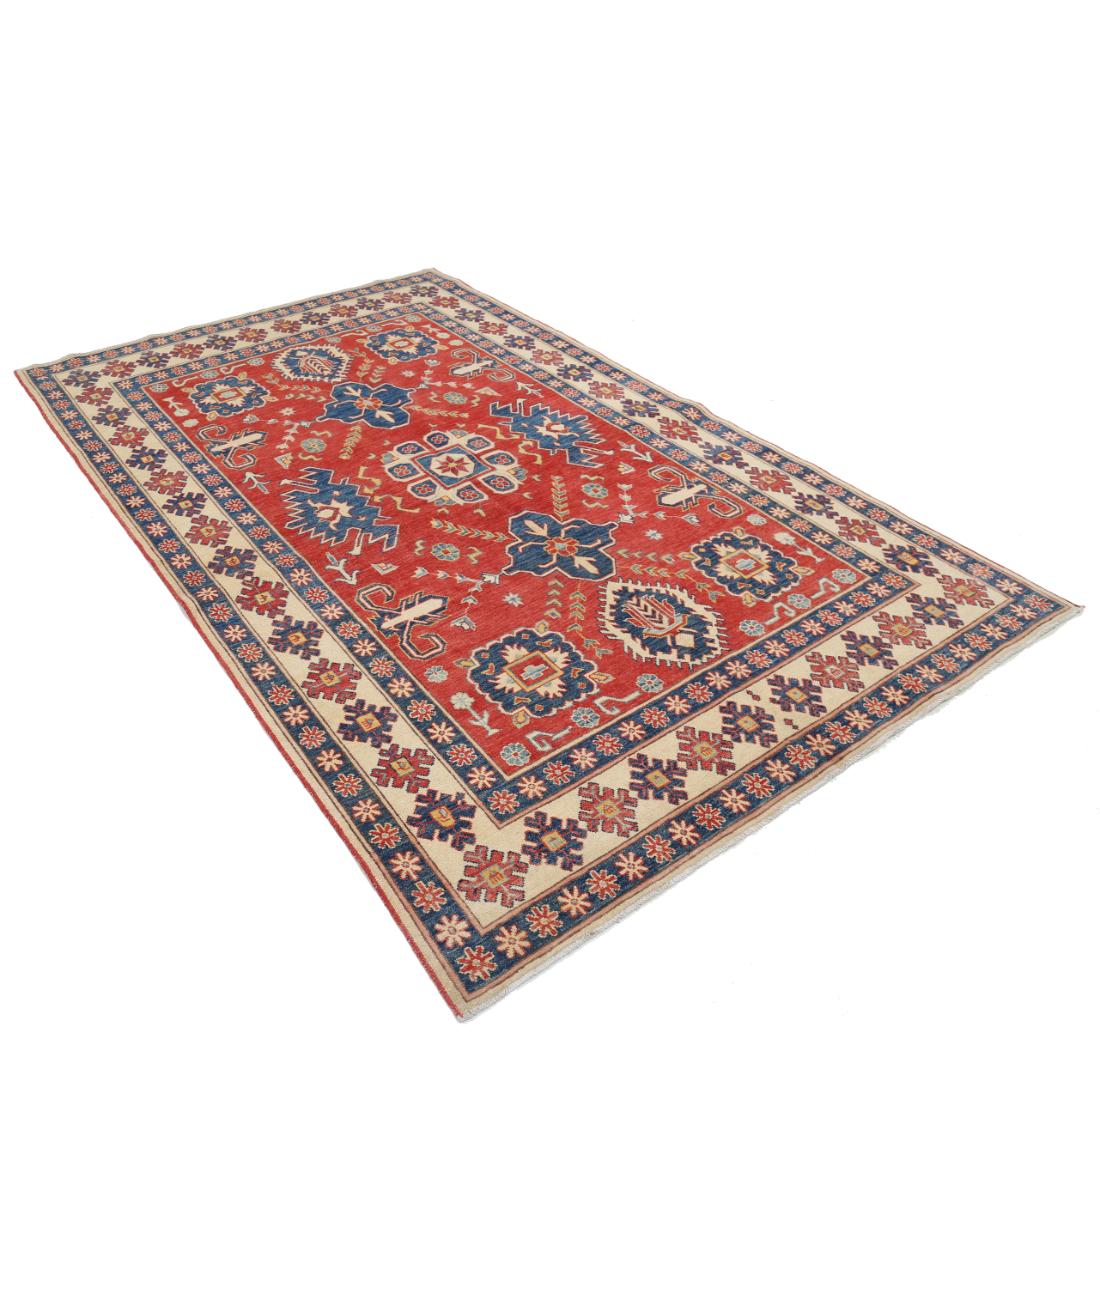 Hand Knotted Tribal Kazak Wool Rug - 5'6'' x 8'10'' 5' 6" X 8' 10" (168 X 269) / Red / Ivory